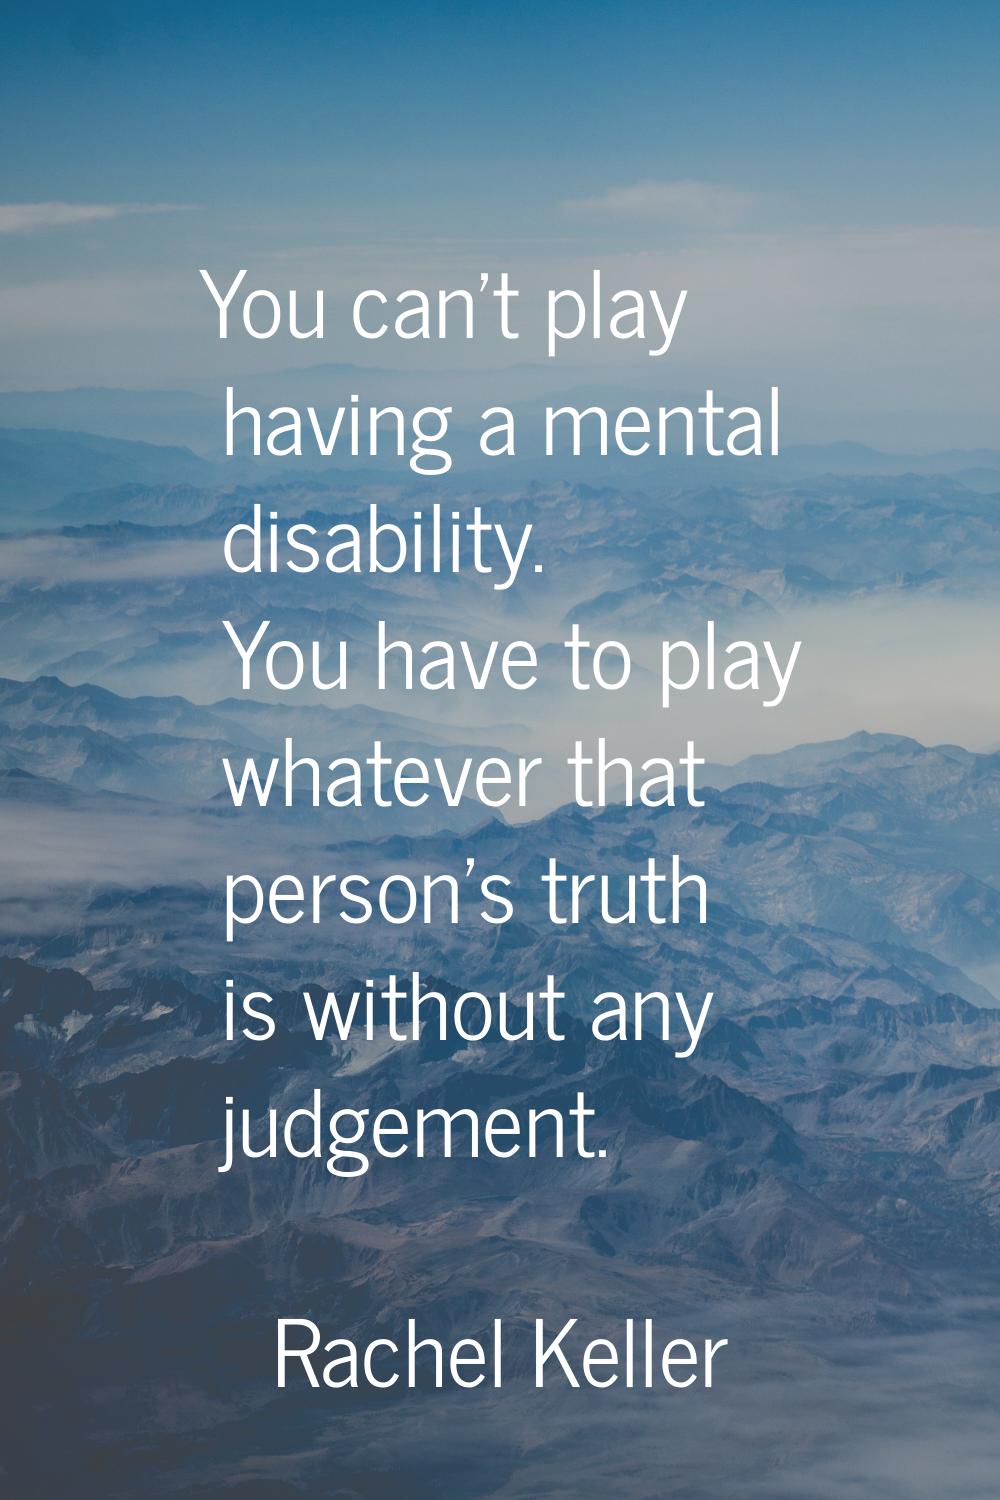 You can't play having a mental disability. You have to play whatever that person's truth is without